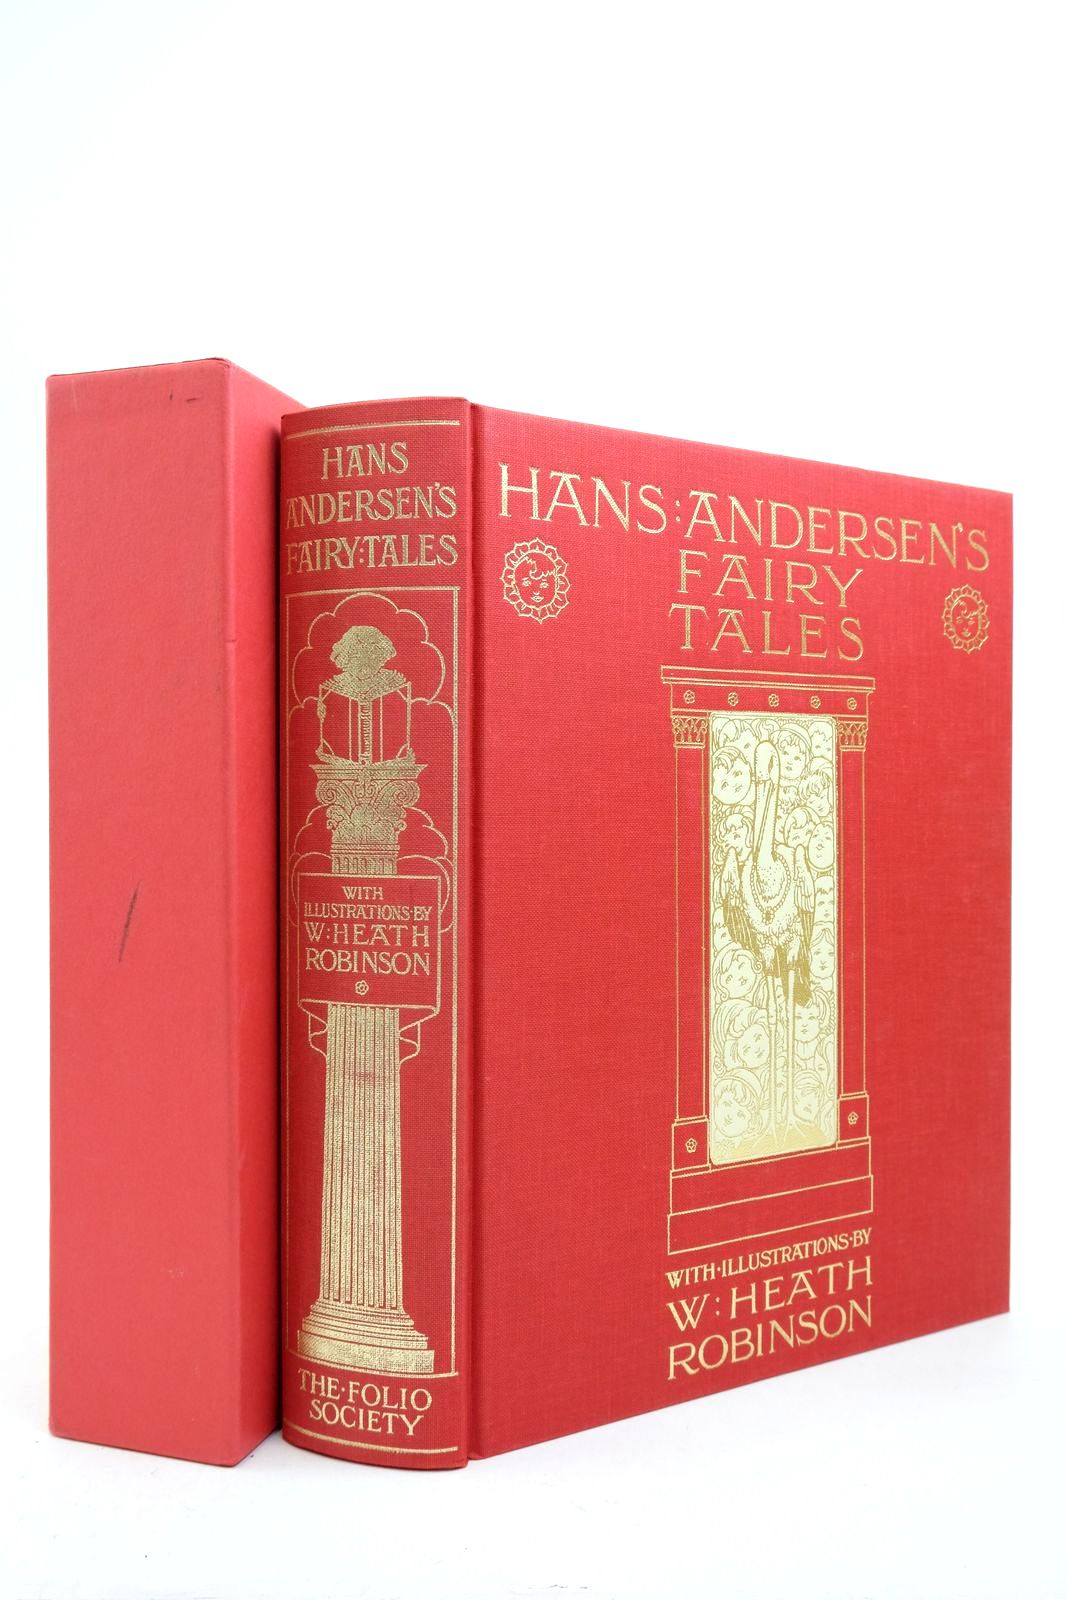 Photo of HANS ANDERSEN'S FAIRY TALES written by Andersen, Hans Christian illustrated by Robinson, W. Heath published by Folio Society (STOCK CODE: 2140751)  for sale by Stella & Rose's Books